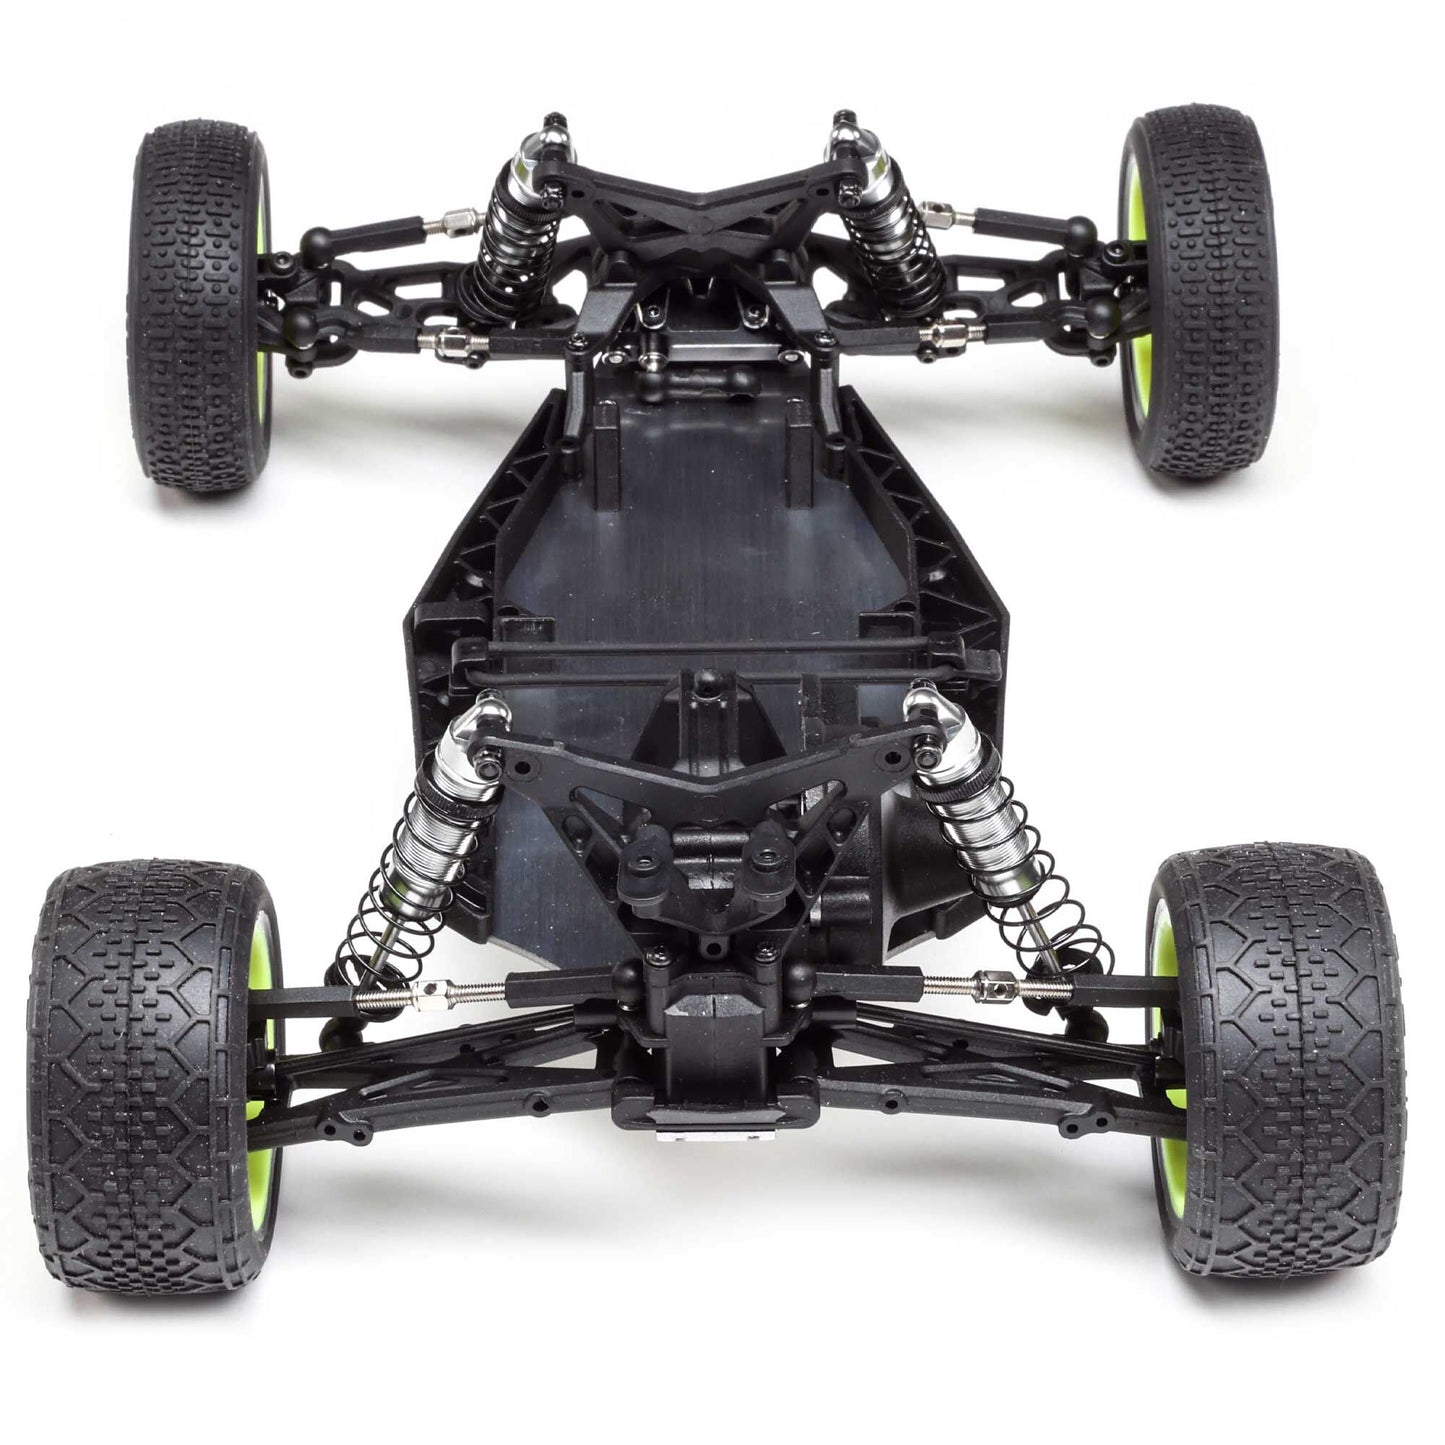 1/16 Mini-B Pro Roller 2WD Buggy